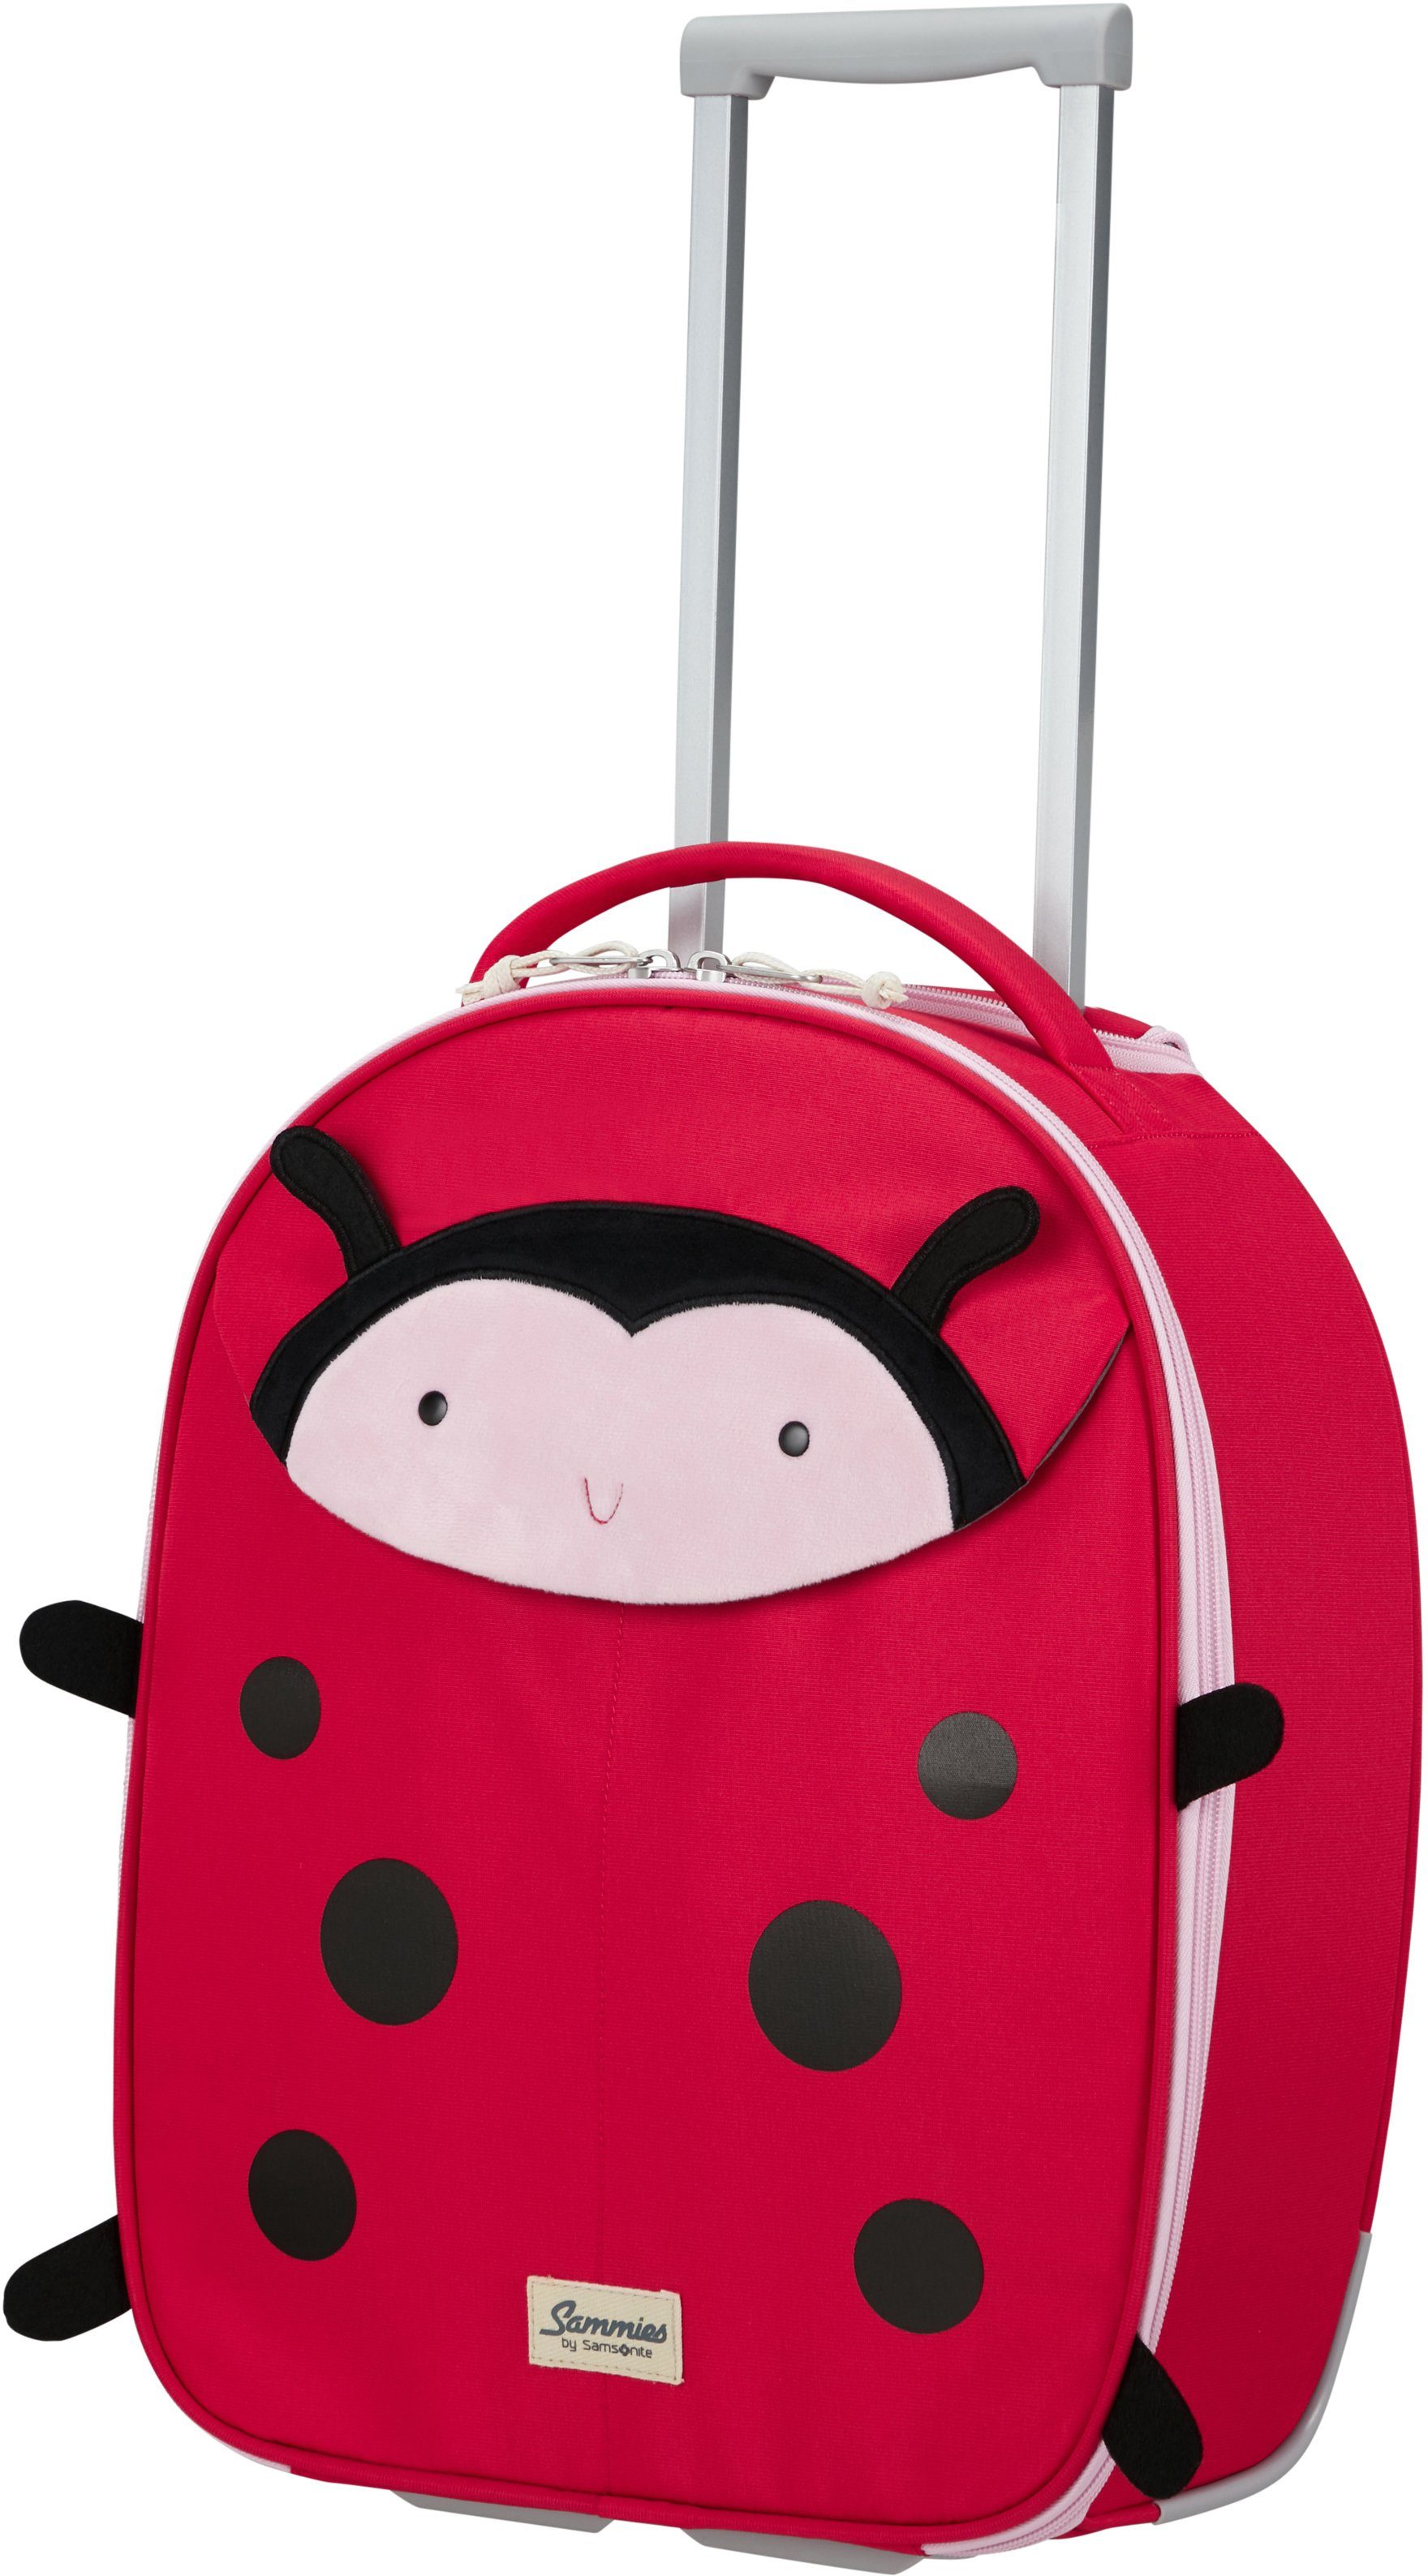 aus ECO, 2 Happy Samsonite Rollen, Ladybug Kinderkoffer Lally, Sammies recyceltem Material